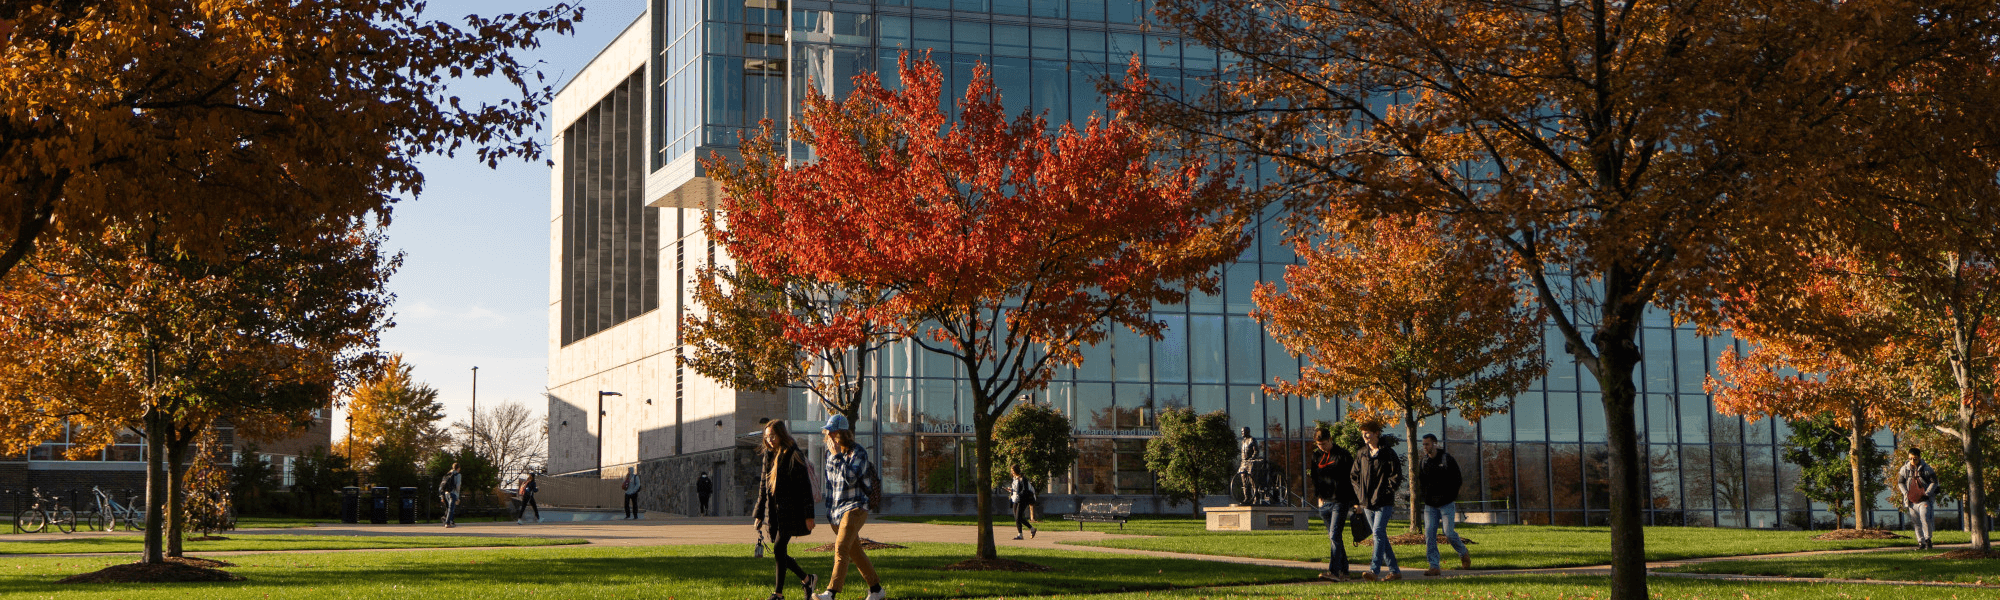 Image of Grand Valley State University's Allendale campus.